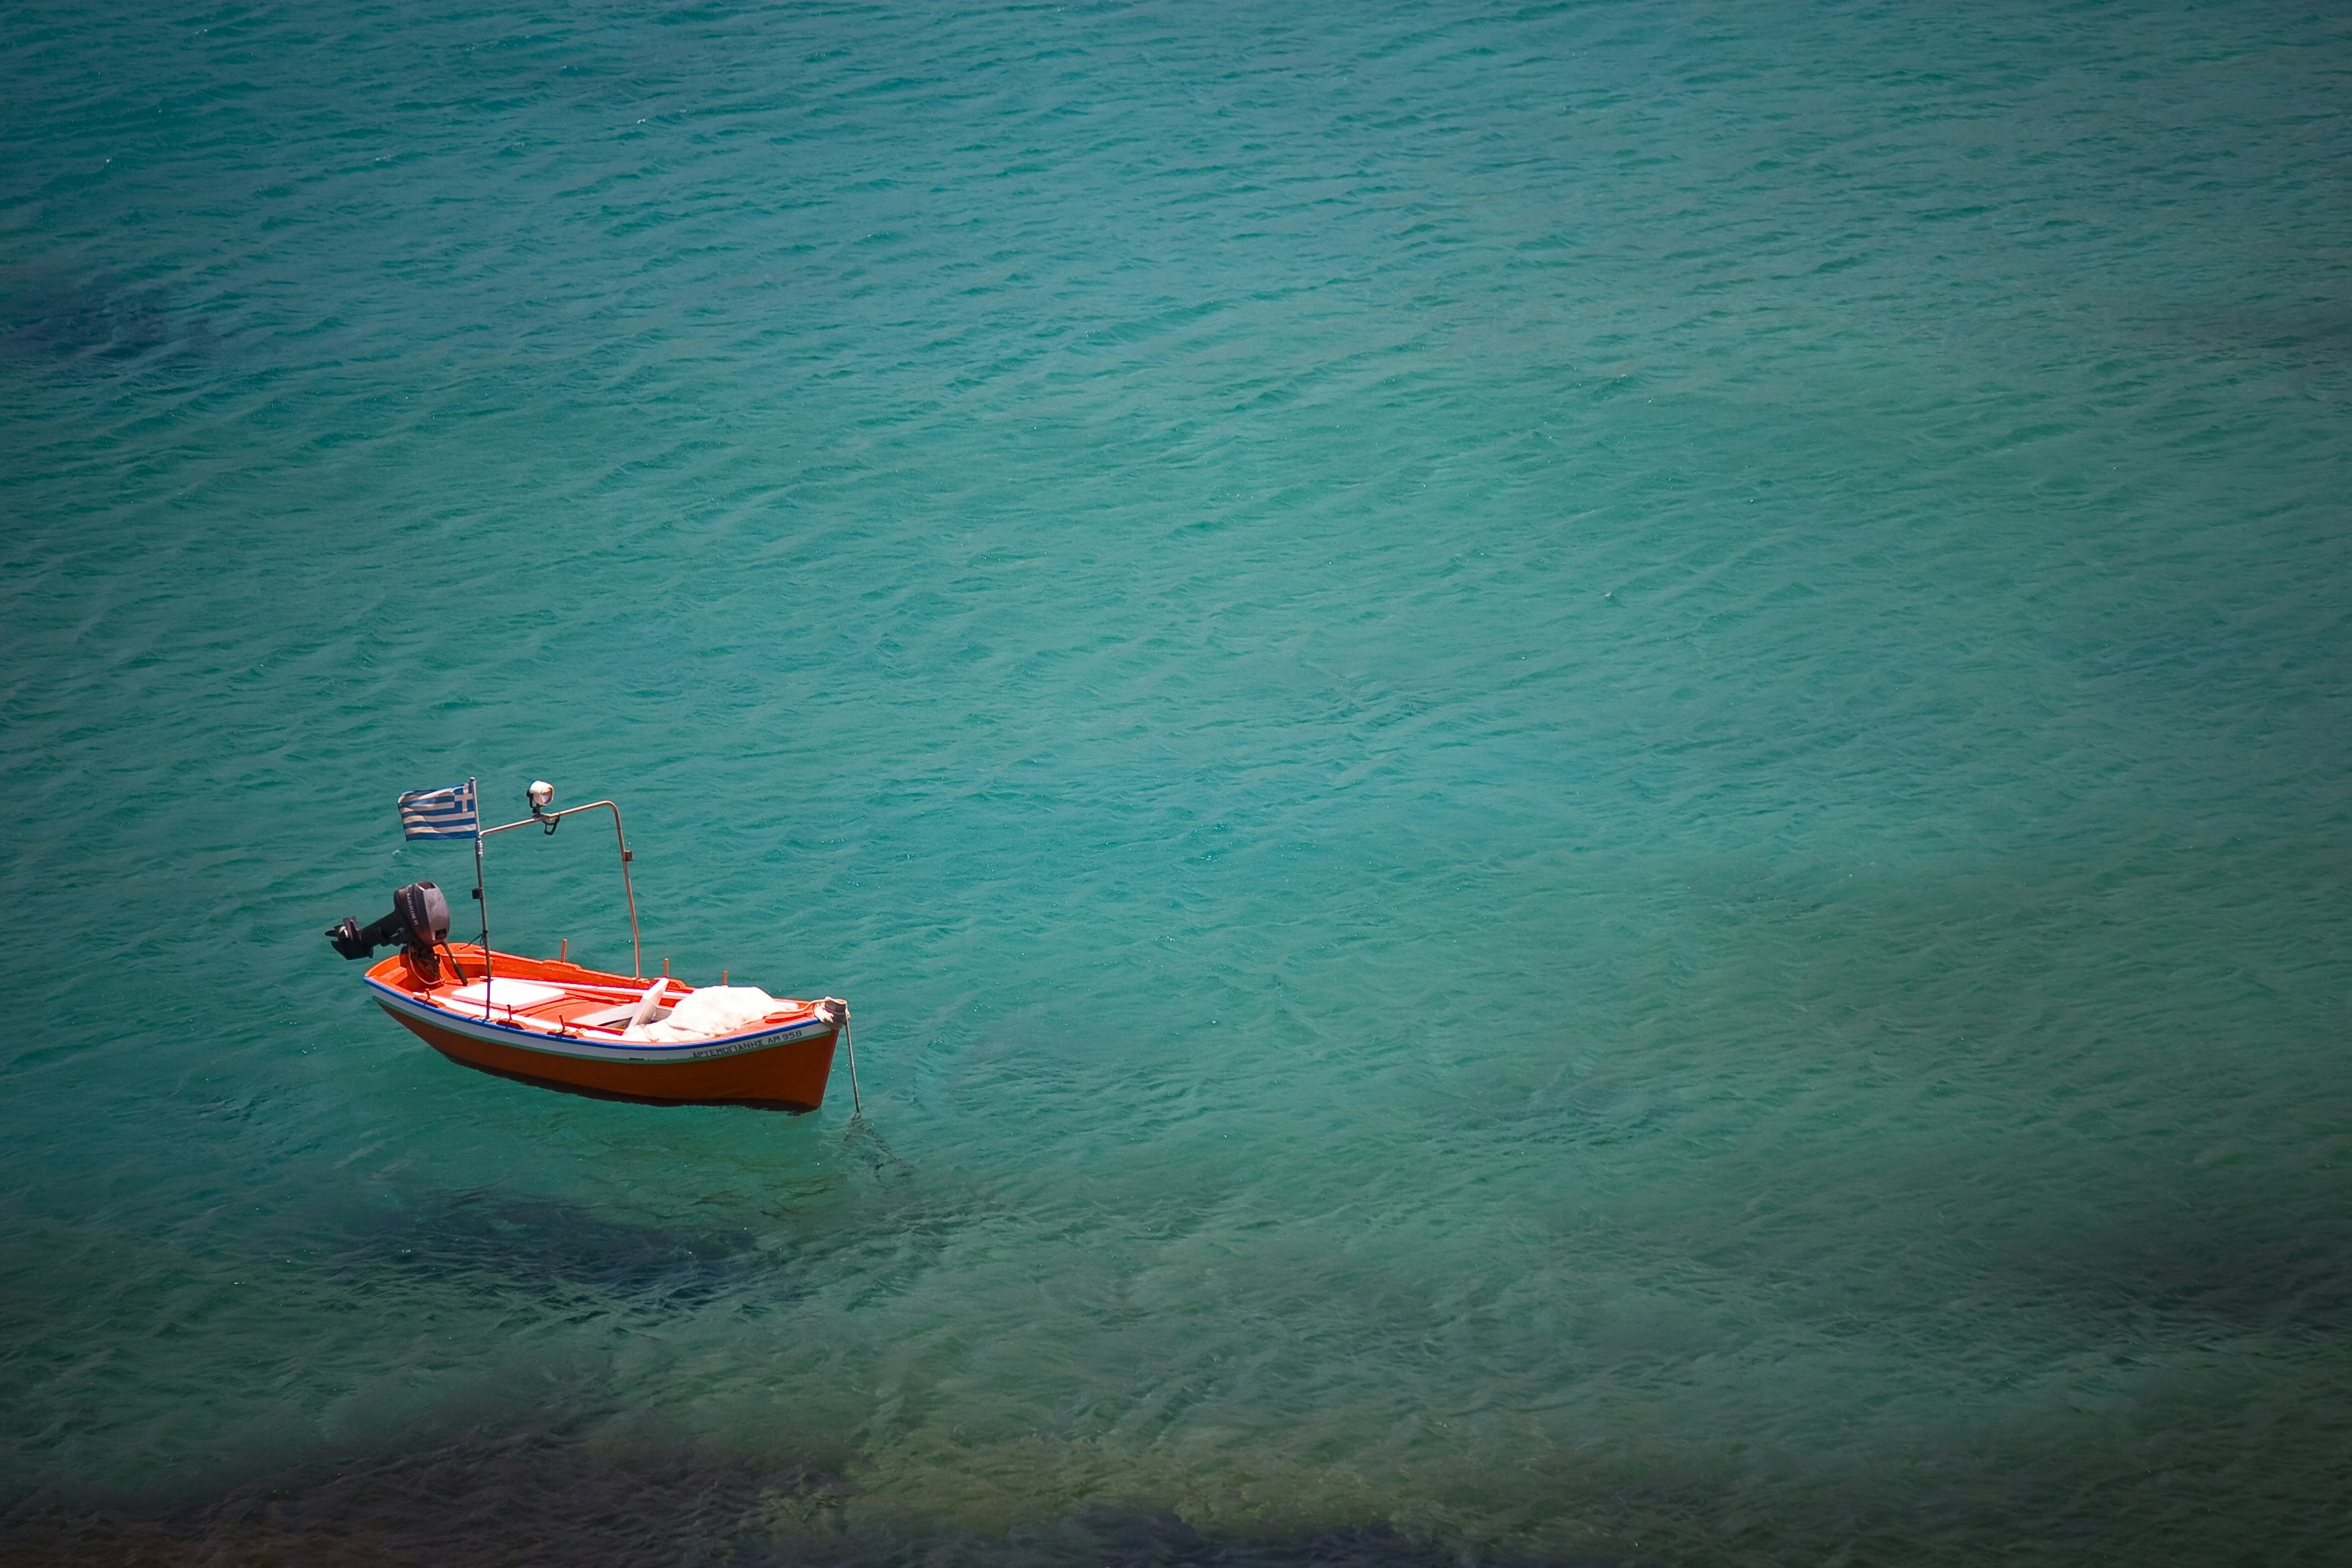 red boat on blue ocean during daytime